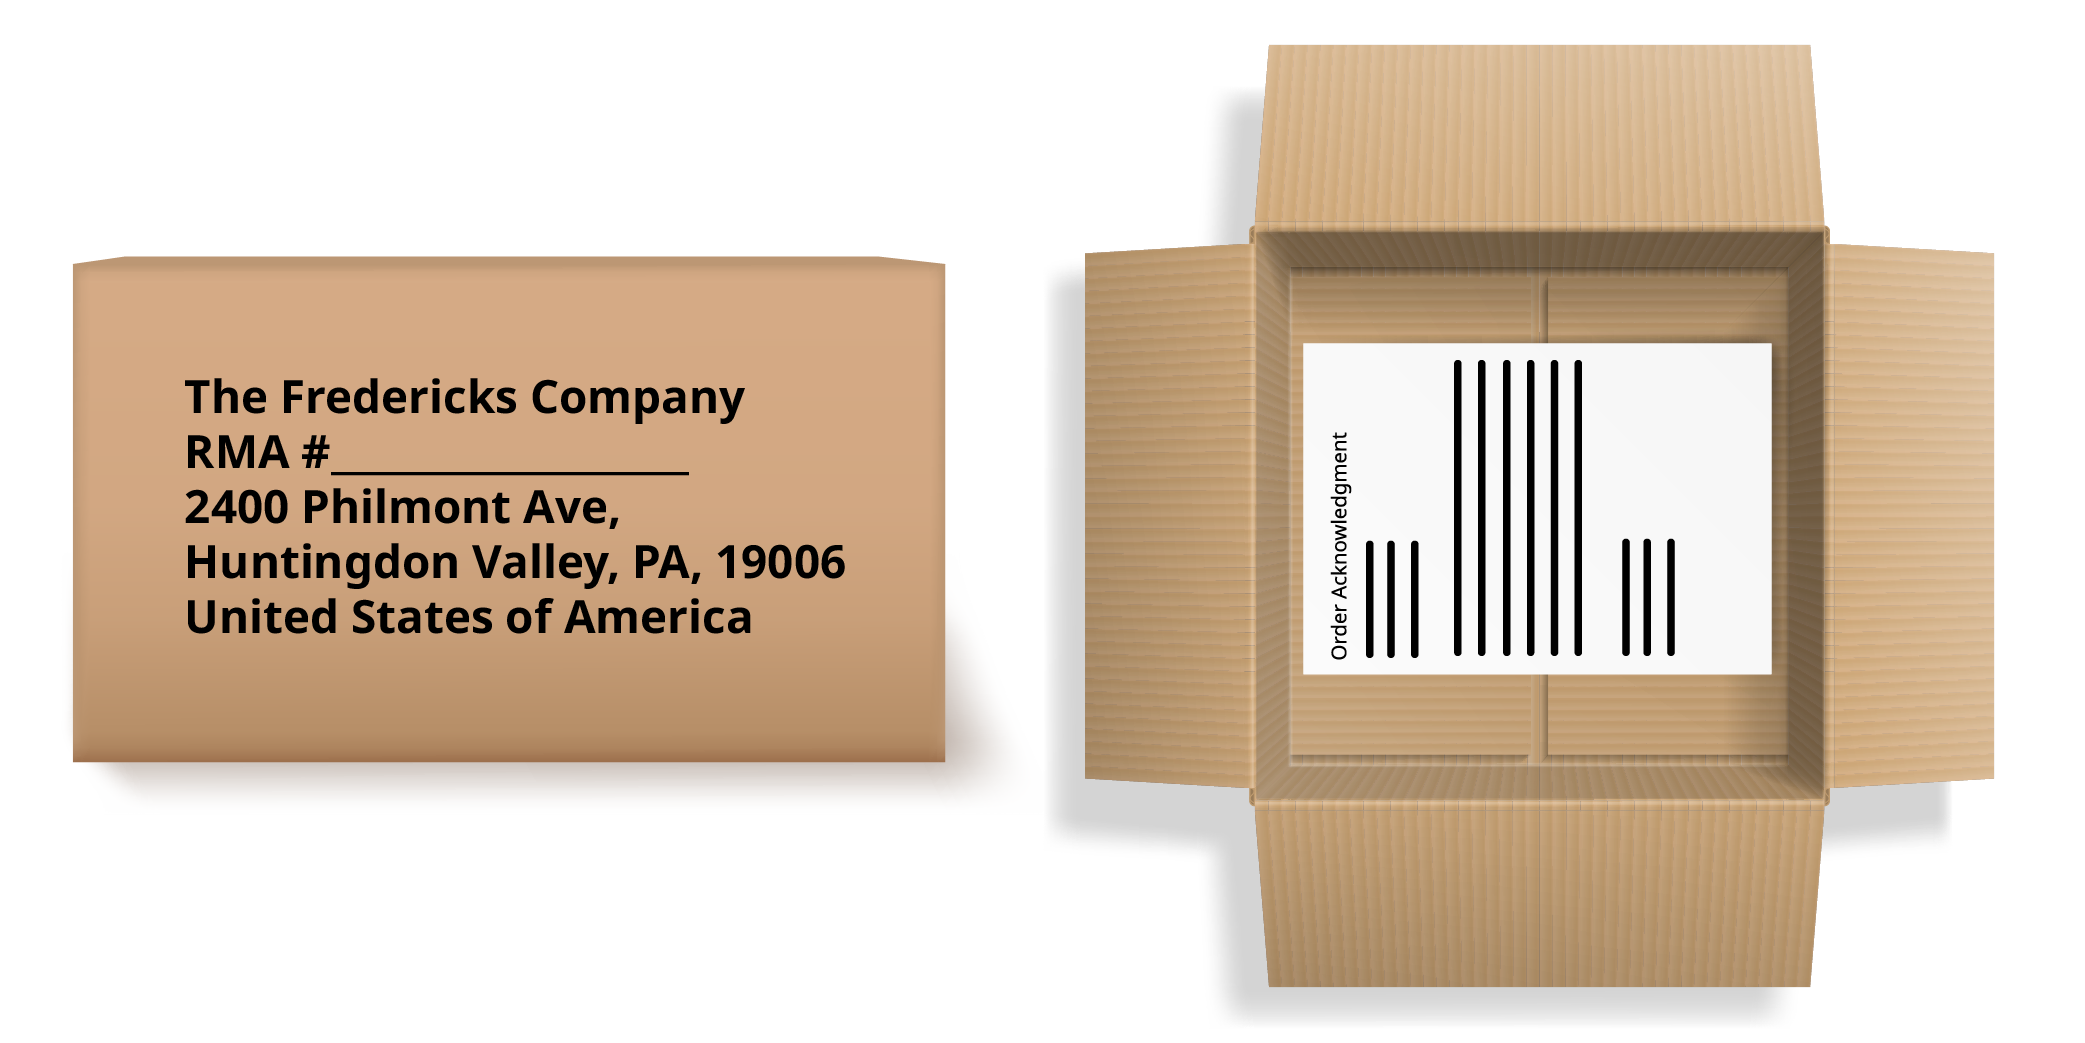 Vector images of shipping instructions for Televac calibration and service